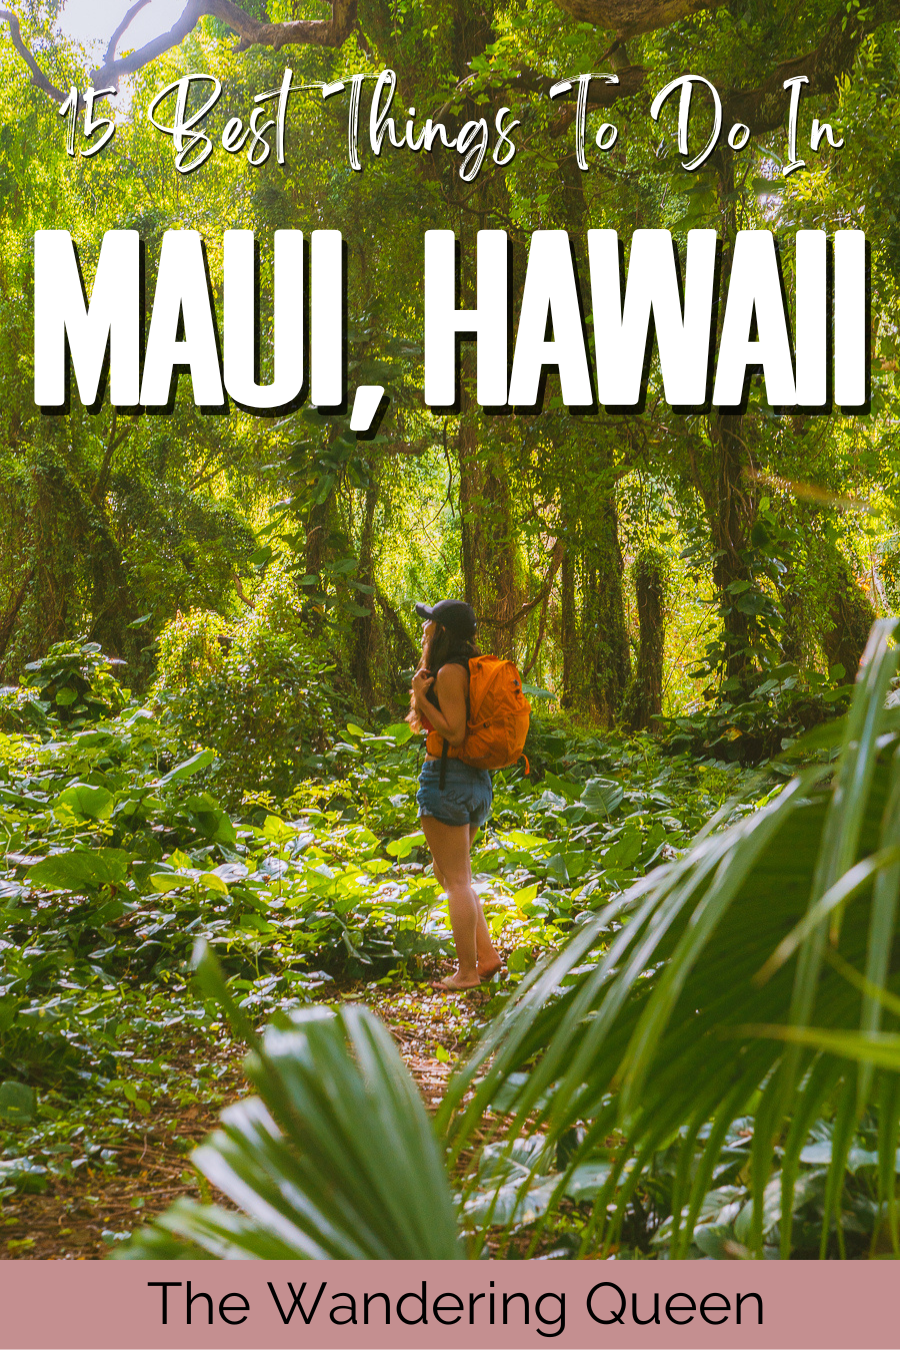 Best Things to Do in Maui